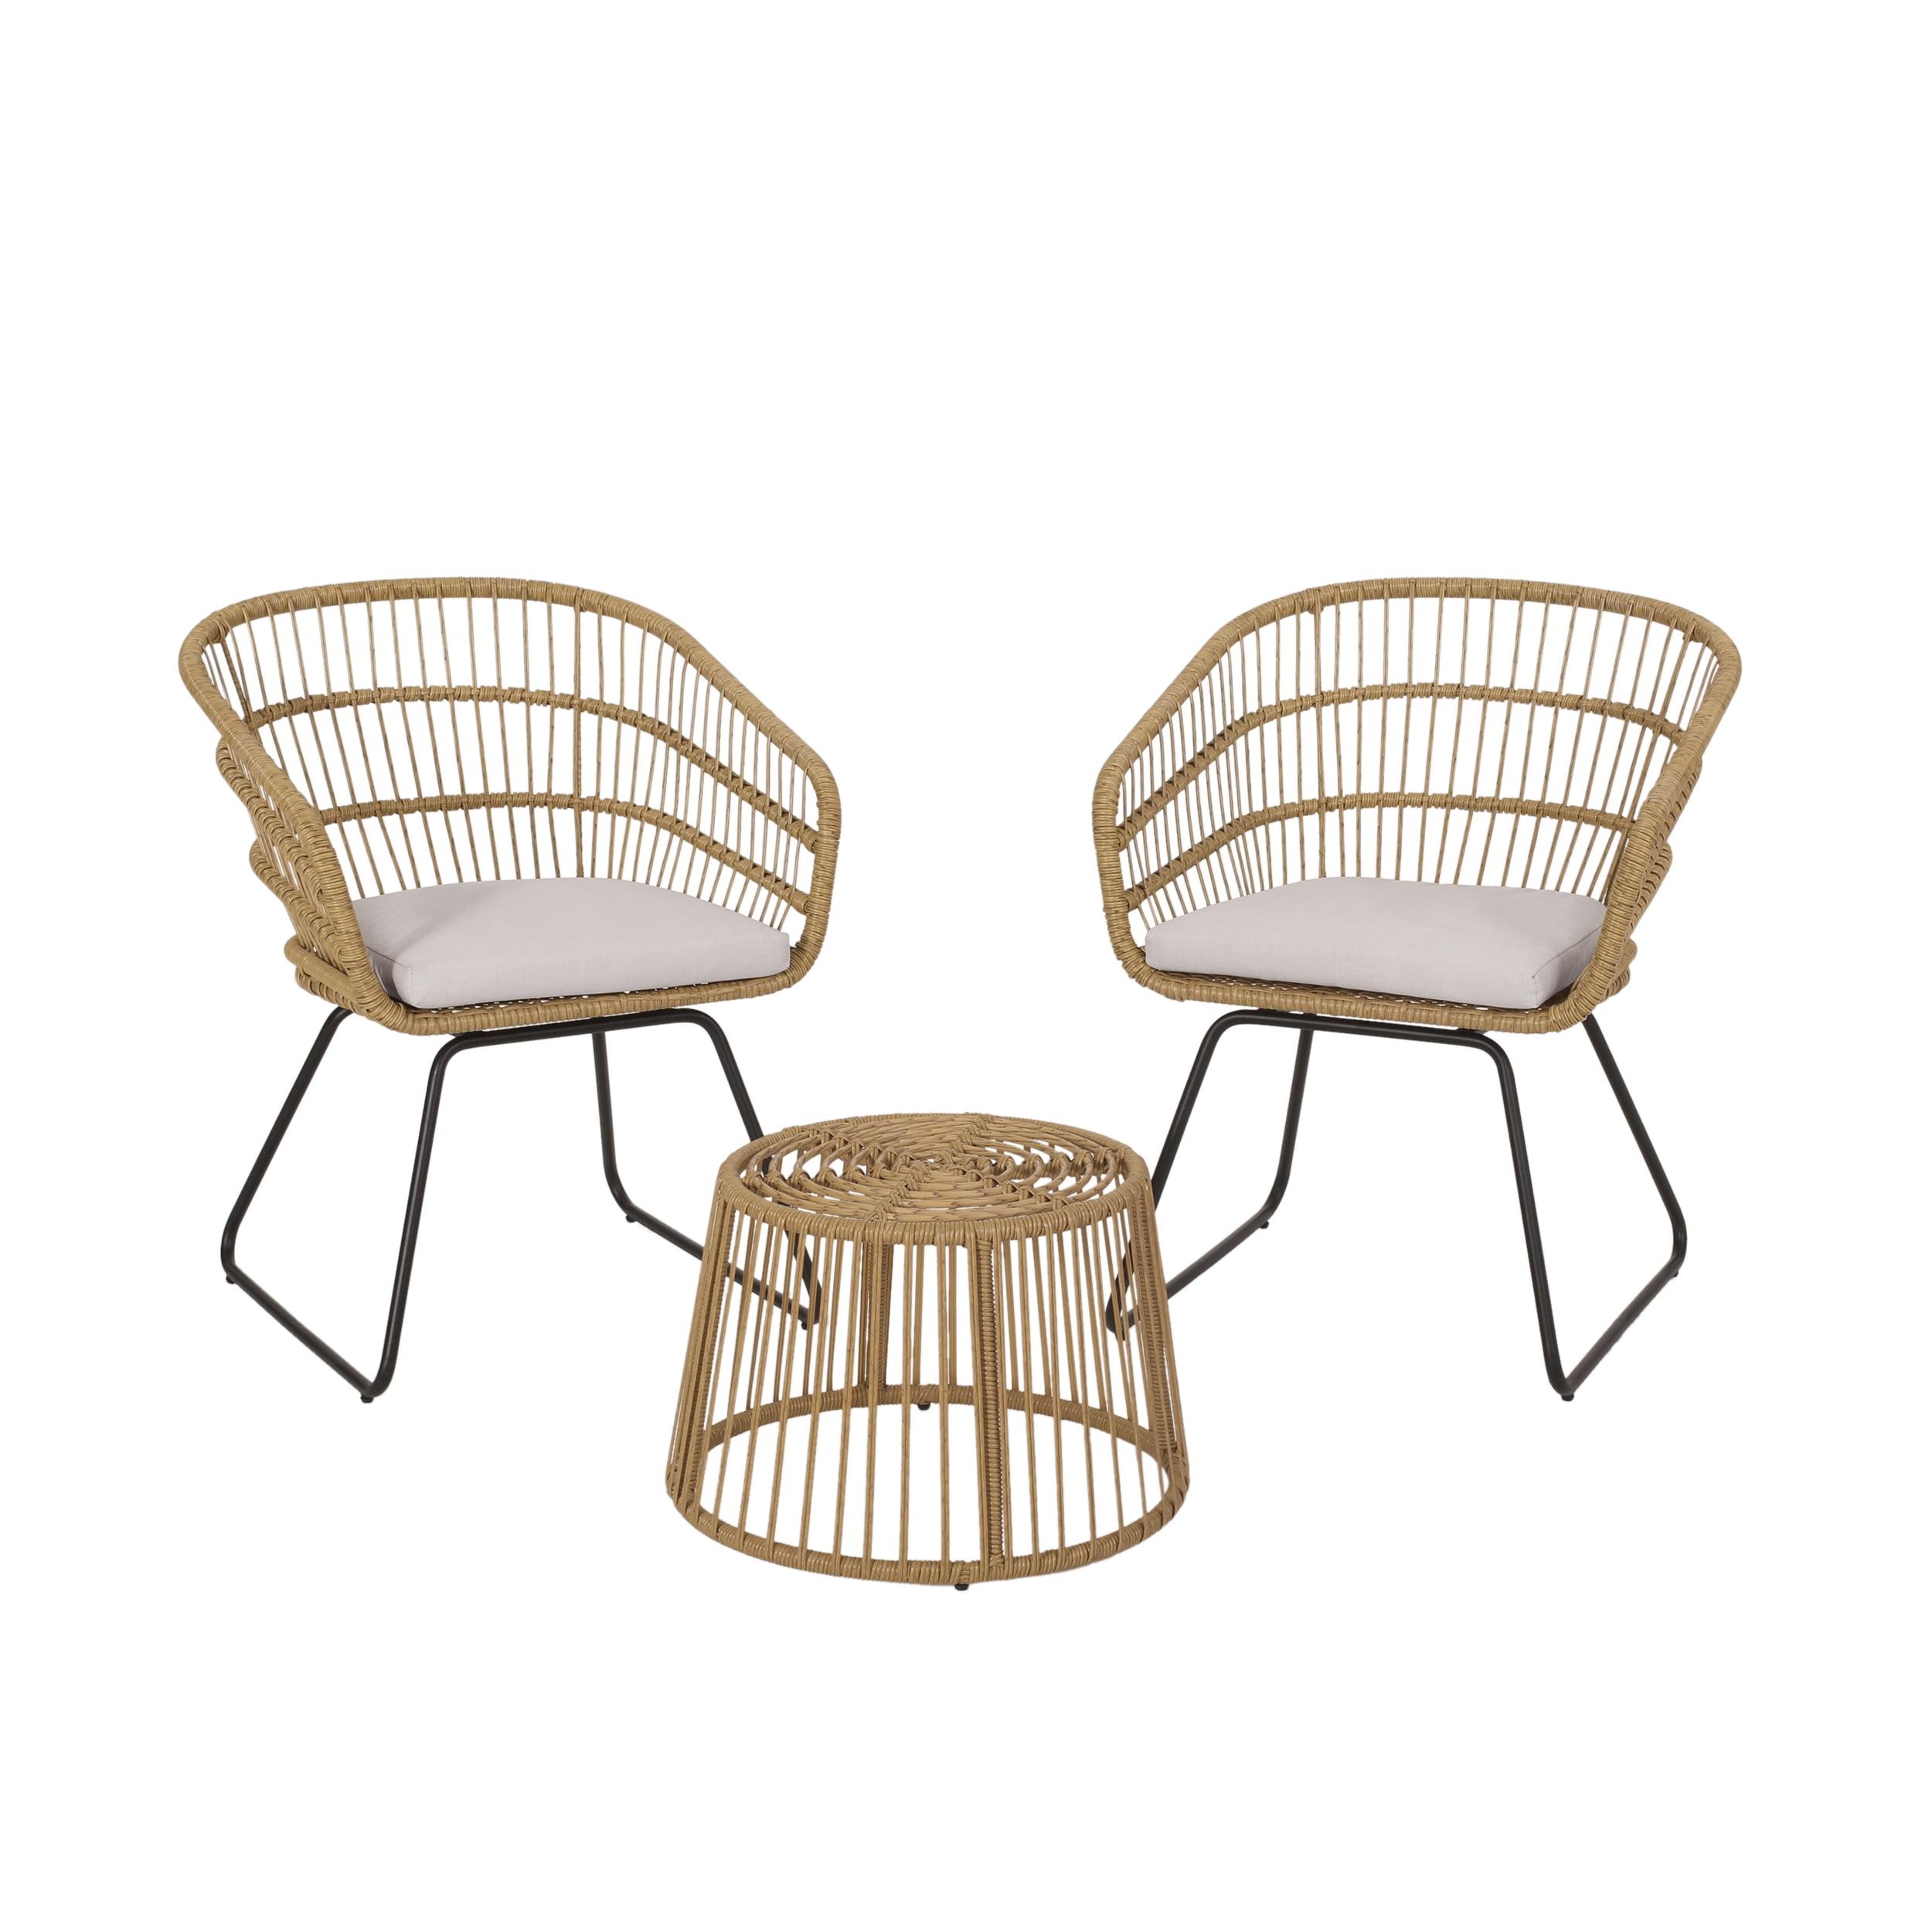 Elegant 2-Person Iron Wicker Chat Set with Beige Cushions